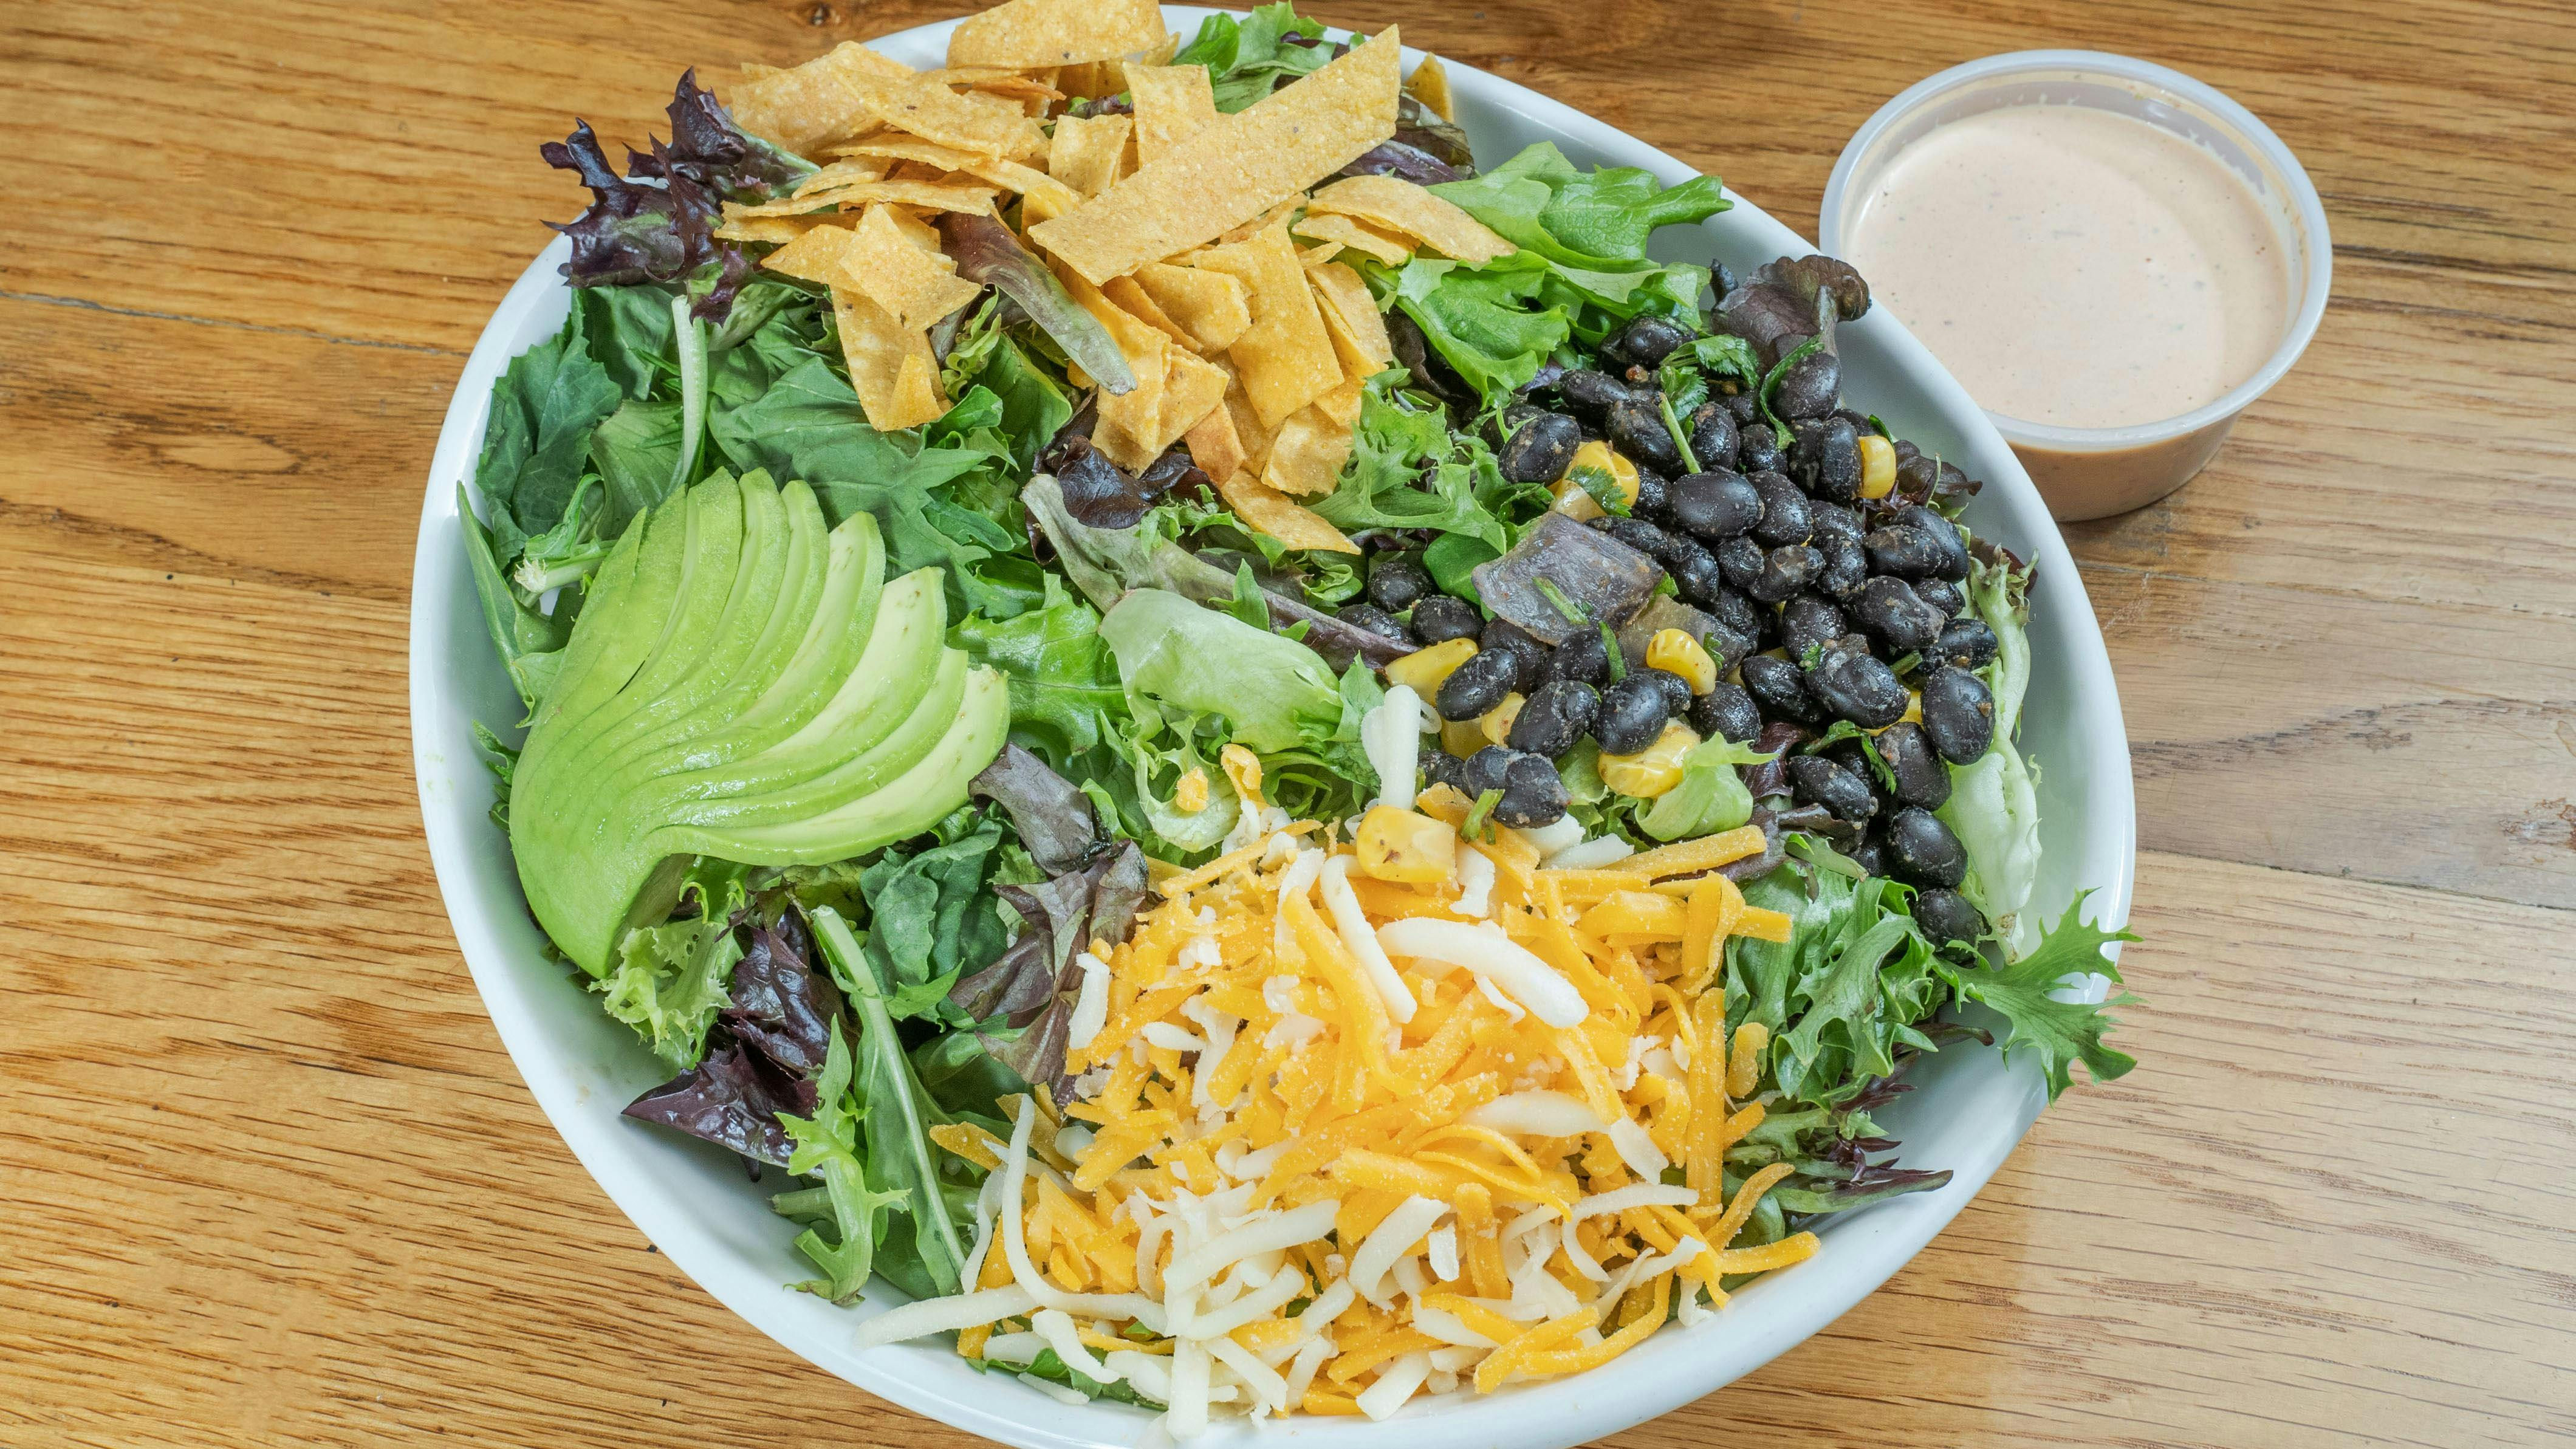 ATX Salad from Happy Chicks - Research Blvd in Austin, TX